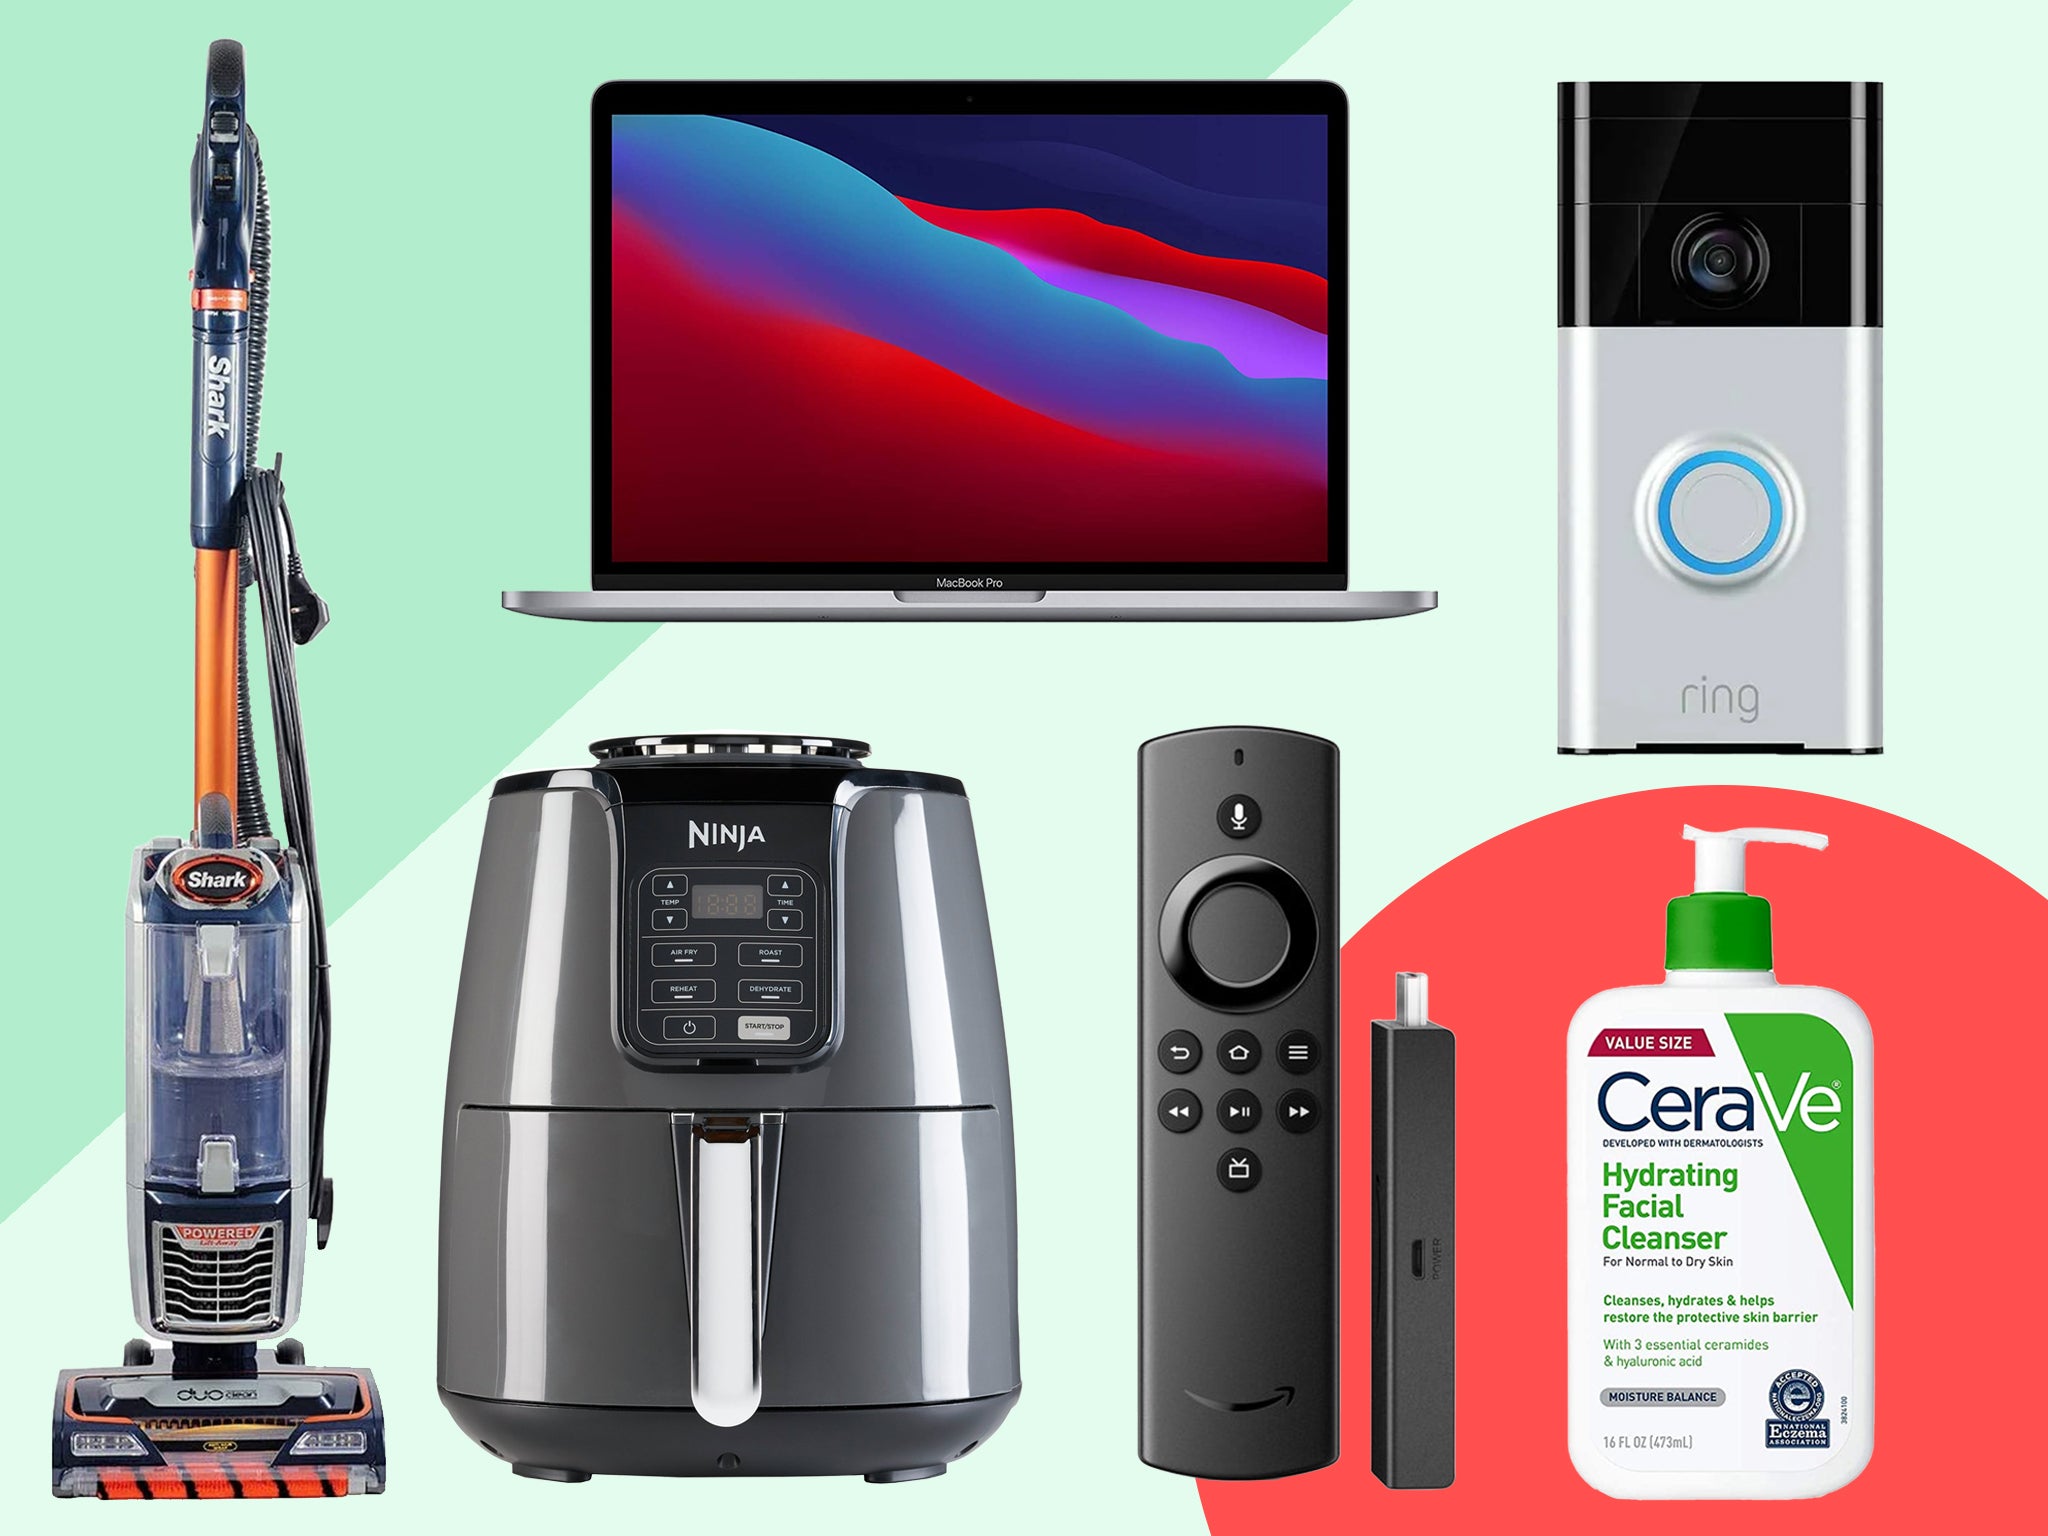 The major sales event sees discounts on everything from home appliances to laptops and beauty buys